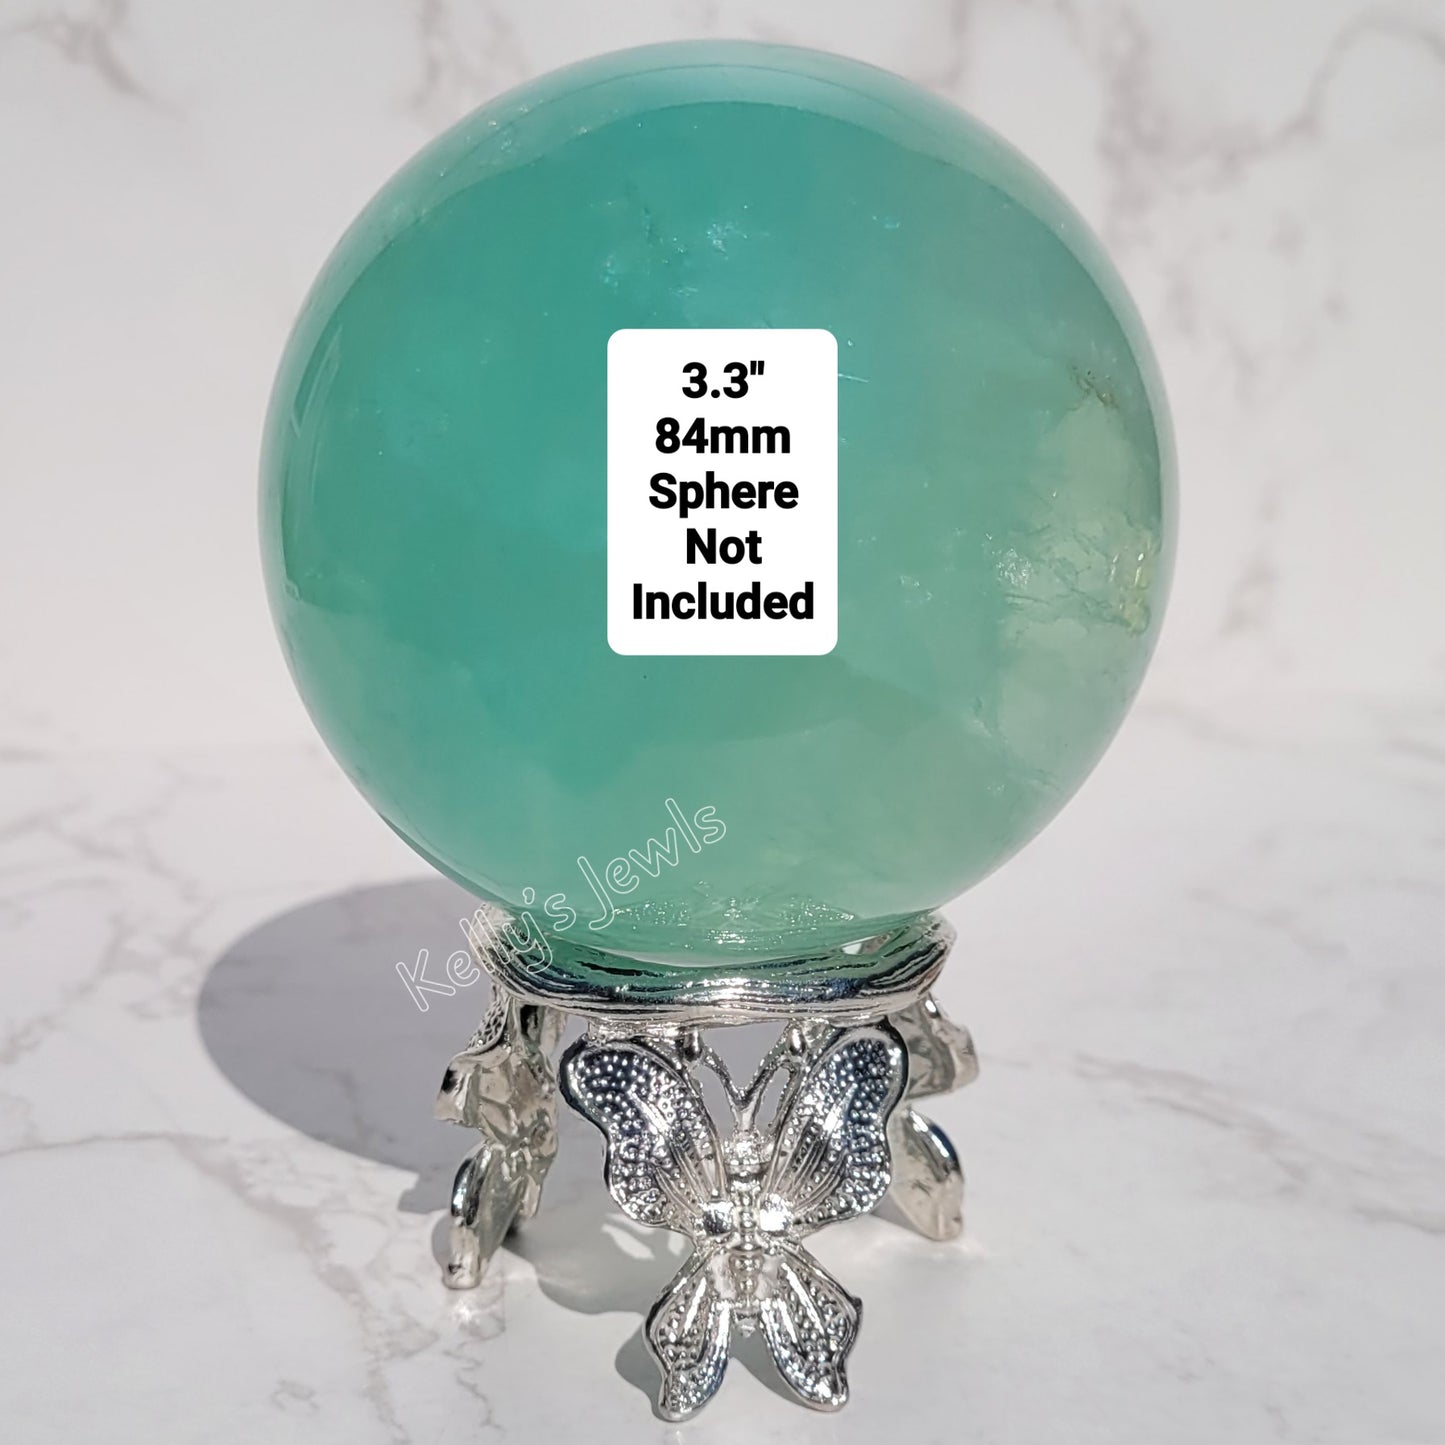 Butterfly Sphere Display Stand in 5 Colors, for Crystal Balls 1.9" to 5" (47mm to 125mm)